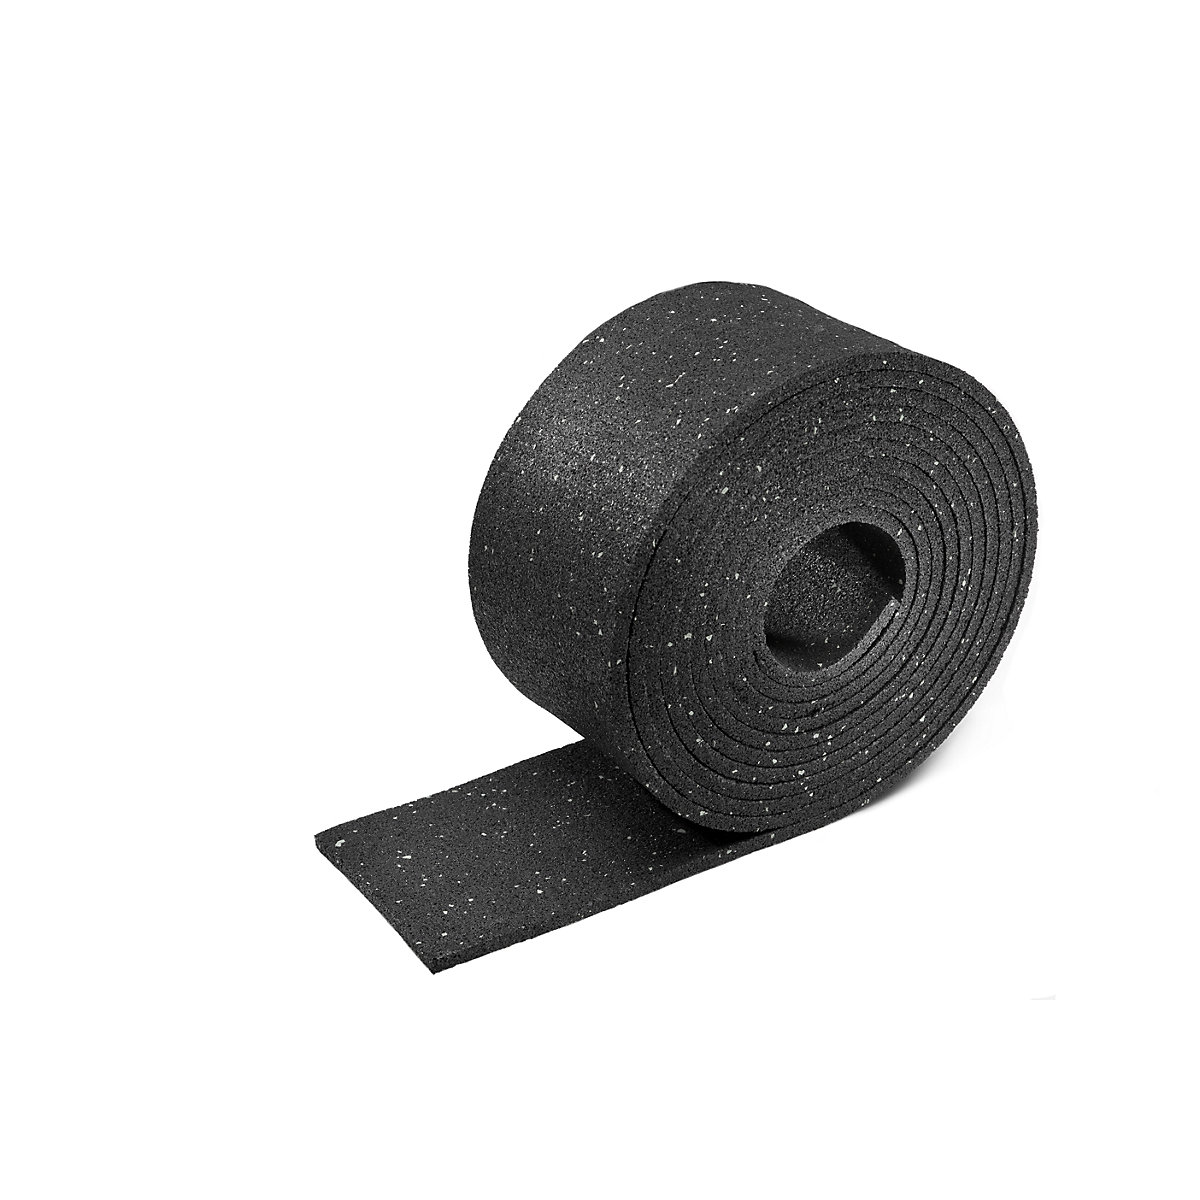 Anti-slip matting for load protection, roll, LxW 5000 x 125 mm, pack of 2-3